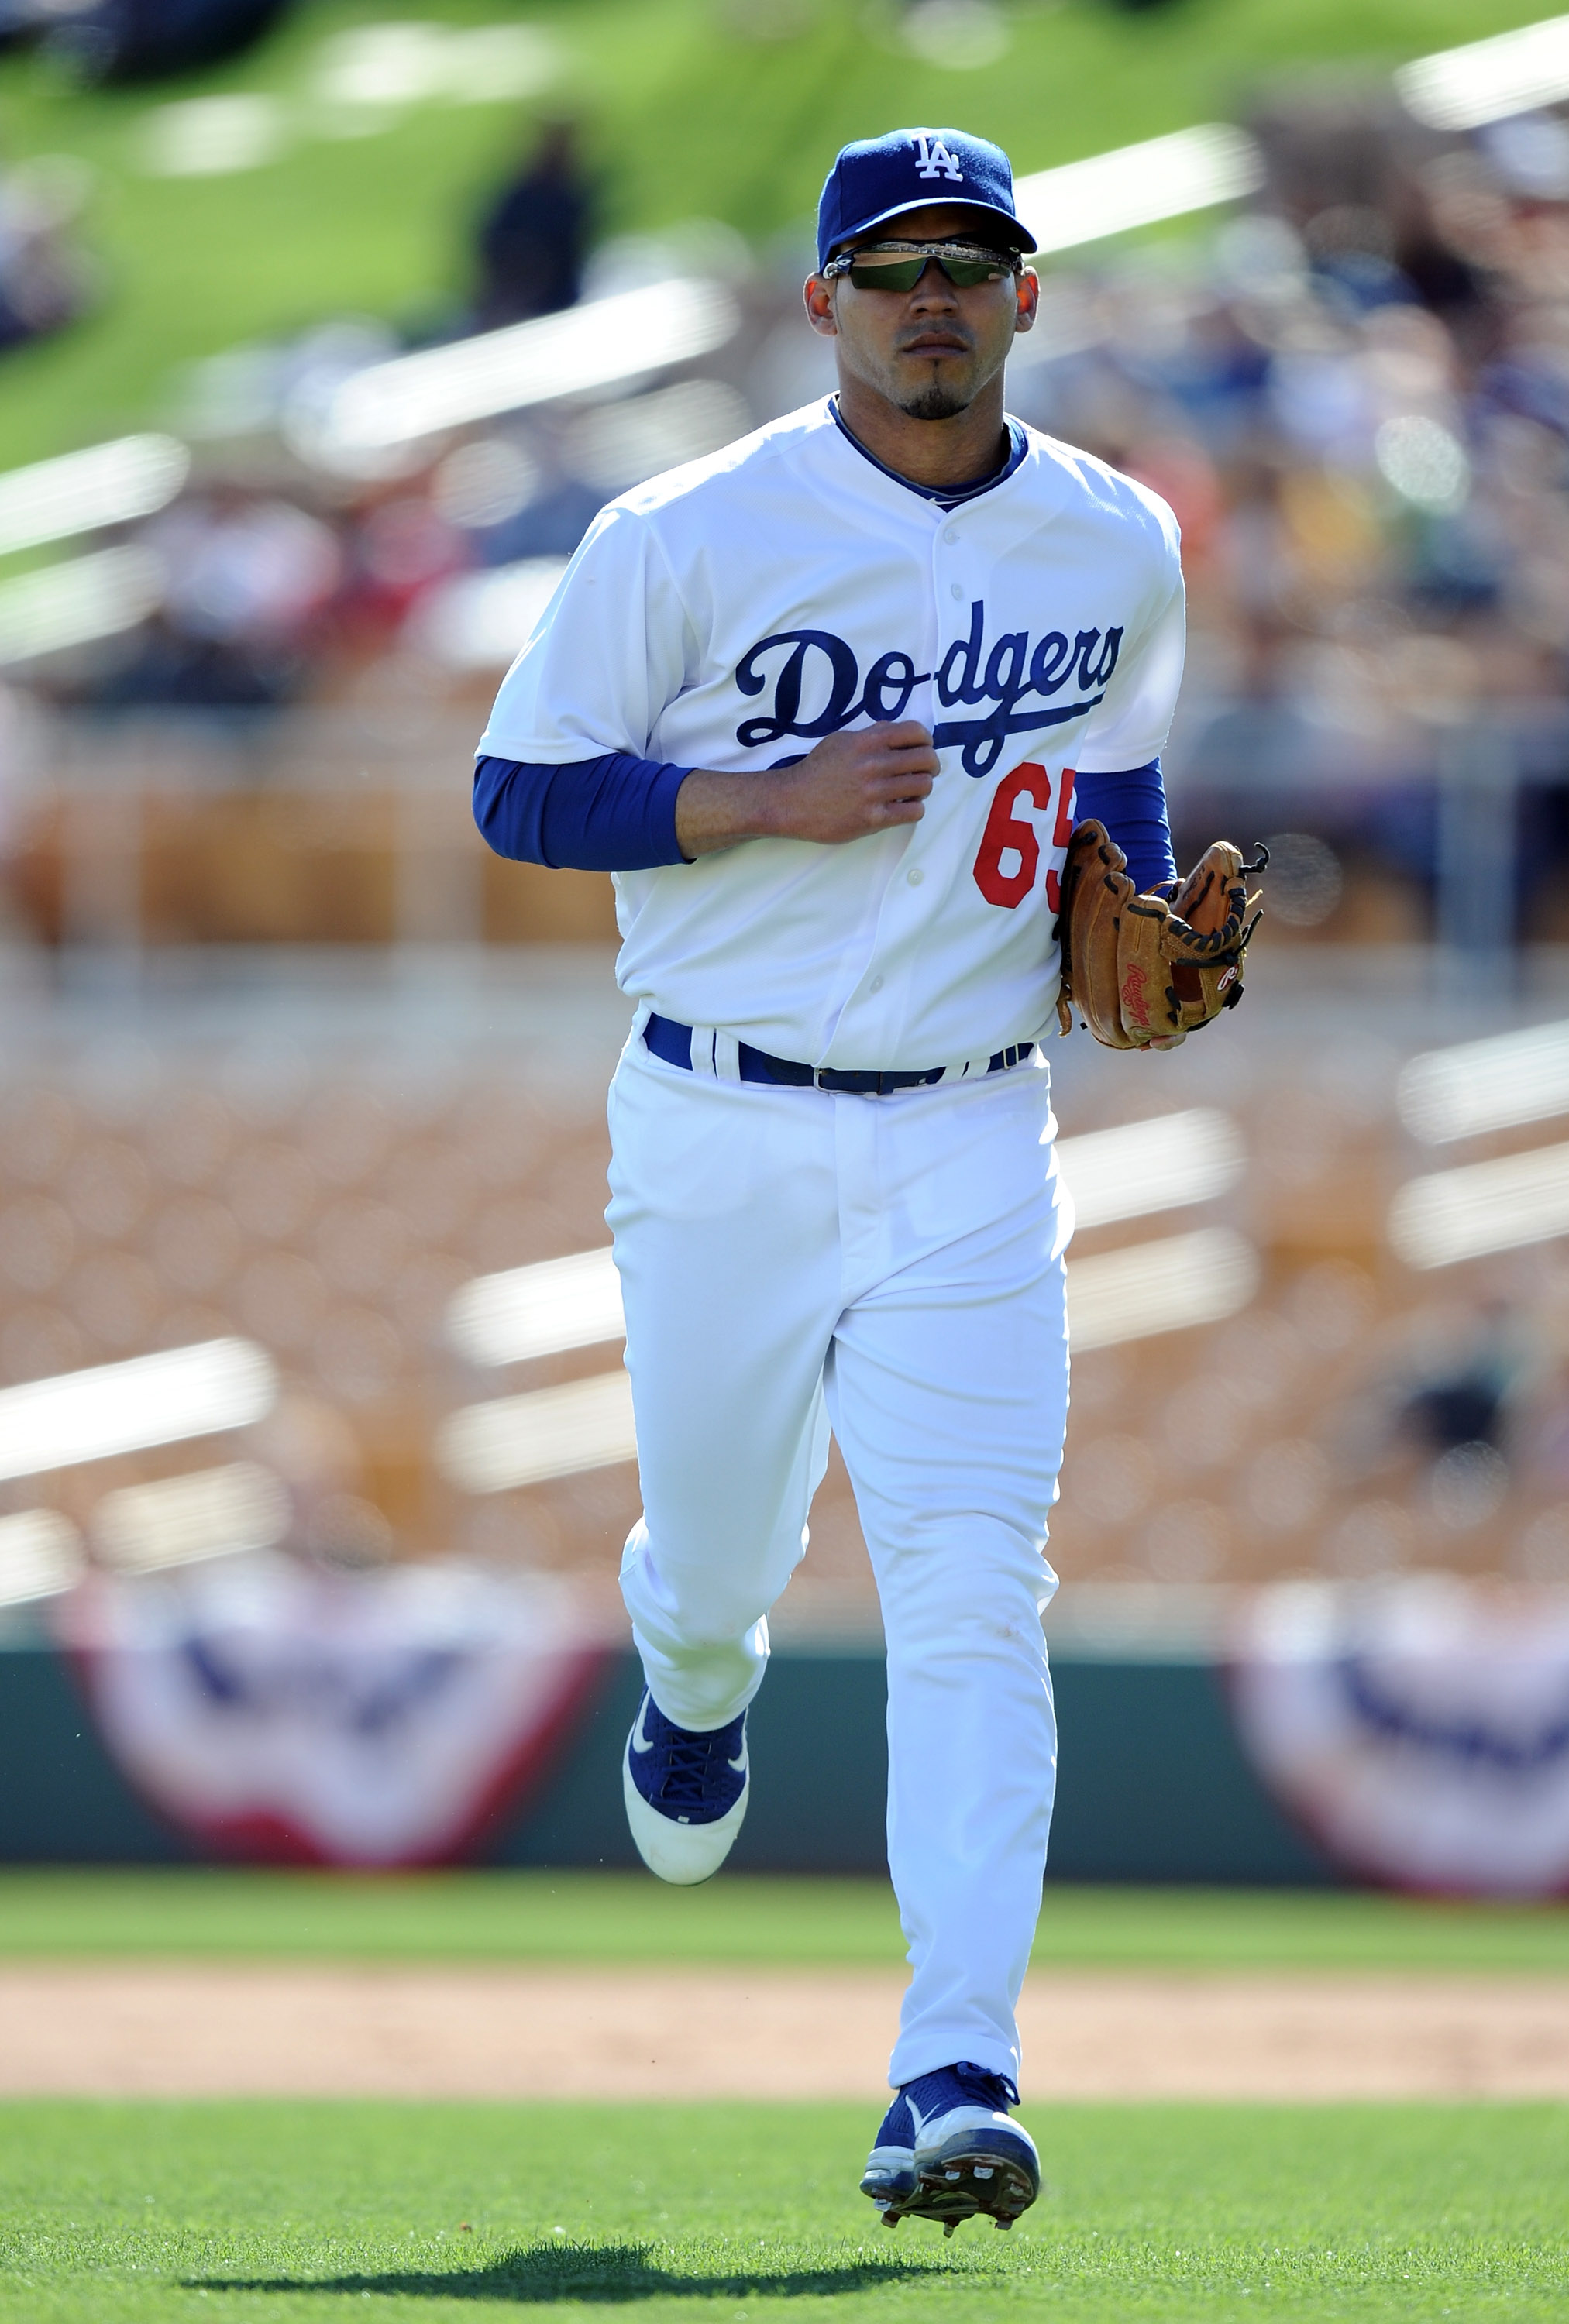 PHOENIX, AZ - FEBRUARY 27:  Ivan De Jesus #65 of the Los Angeles Dodgers leaves the field during spring training at Camelback Ranch on February 27, 2011 in Phoenix, Arizona.  (Photo by Harry How/Getty Images)